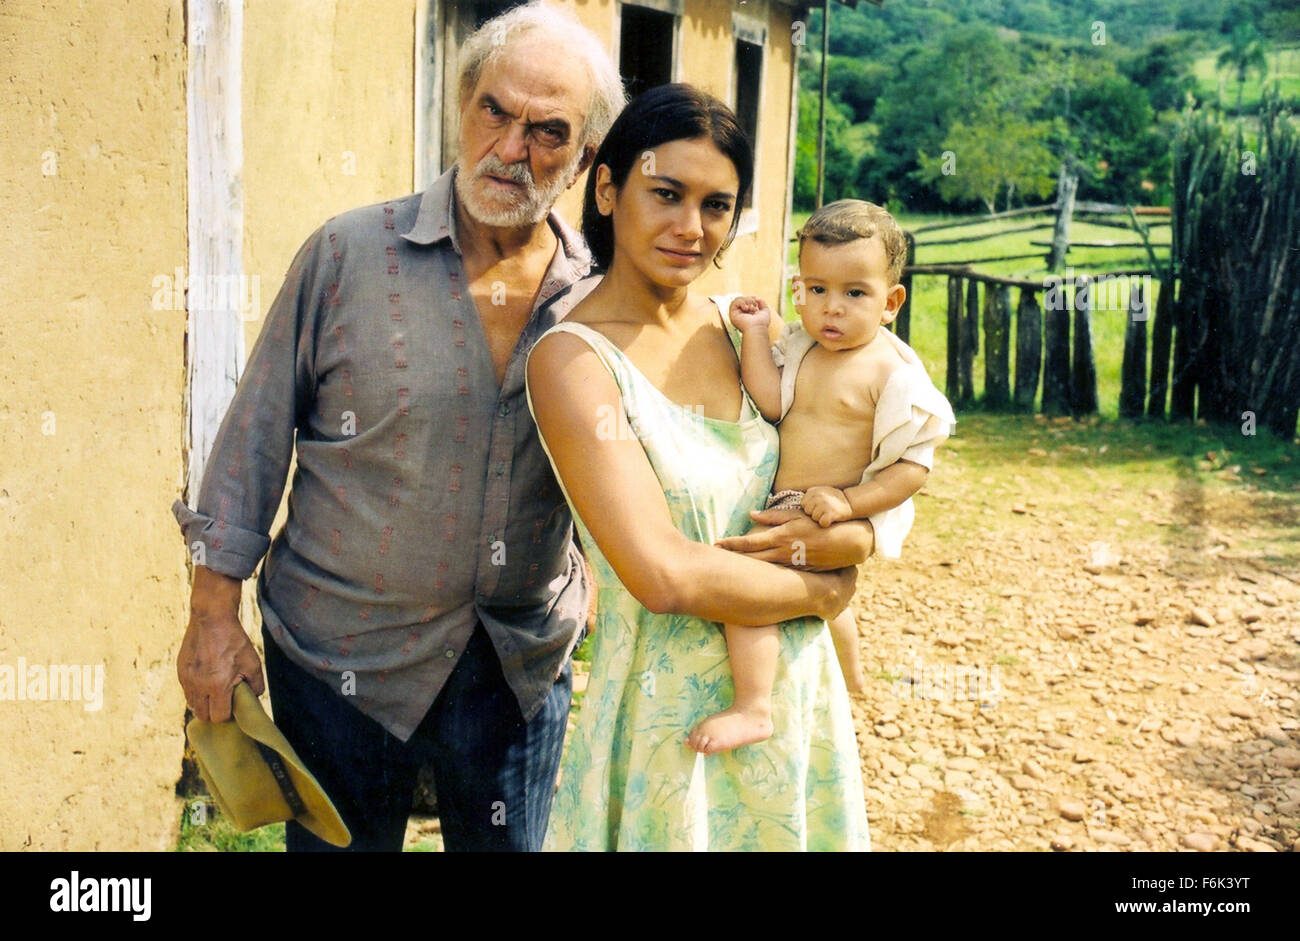 RELEASE DATE: July 13, 2006. MOVIE TITLE: Two Sons of Francisco. STUDIO: Globo Filmes. PLOT: The story of Francisco, a very simple and poor man whose dream was to see his children become country music stars, and who made all the efforts to make it happen. PICTURED: LIMA DUARTE as Benedito and DIRA PAES as Helena Siqueira de Camargo. Stock Photo